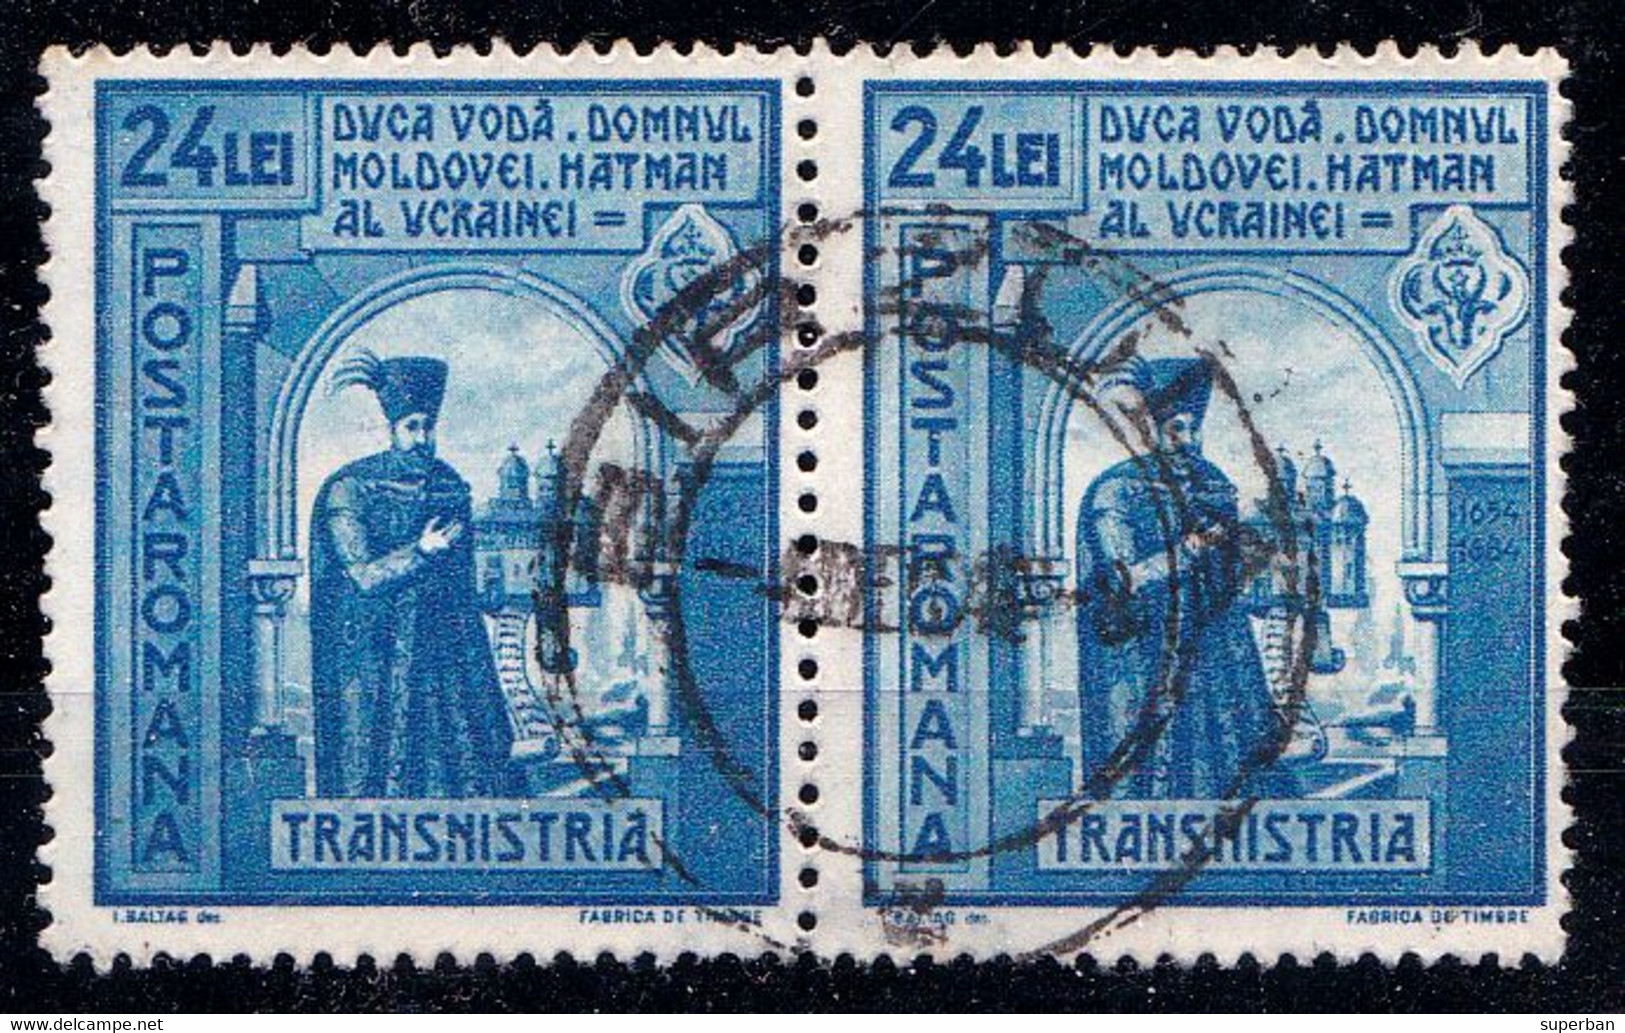 PAIRE De 2 TIMBRES / PAIR Of 2 STAMPS : ROMANIA - TRANSNISTRIA - CANCELLATION : BIRZULA - 1943 (af825) - World War 2 Letters